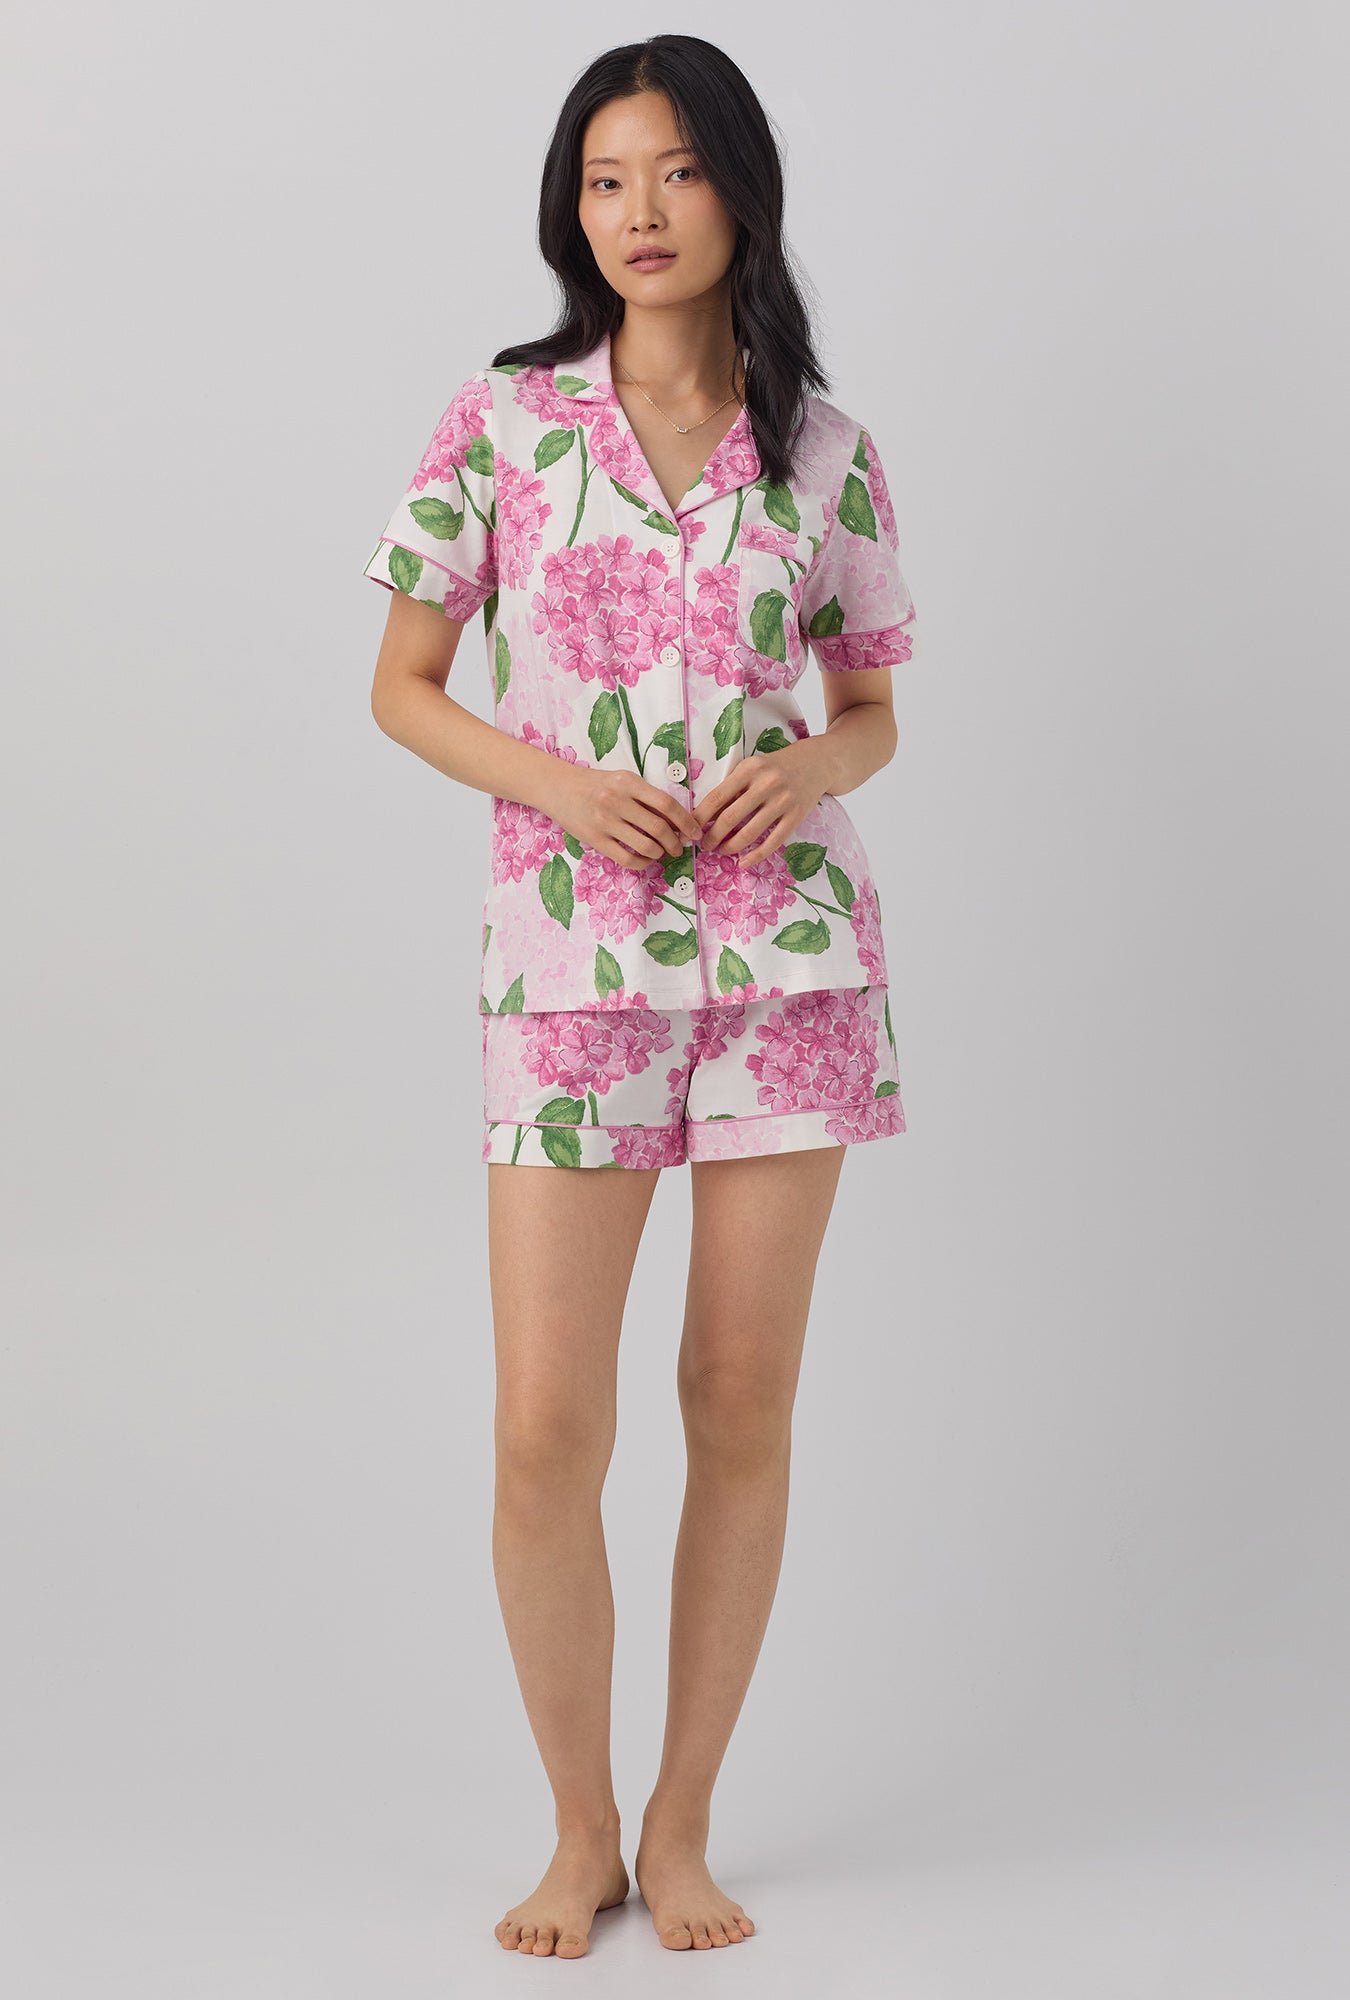 A lady wearing pink  Short Sleeve Classic Shorty Stretch Jersey PJ Set with Grand Hydrangea print.